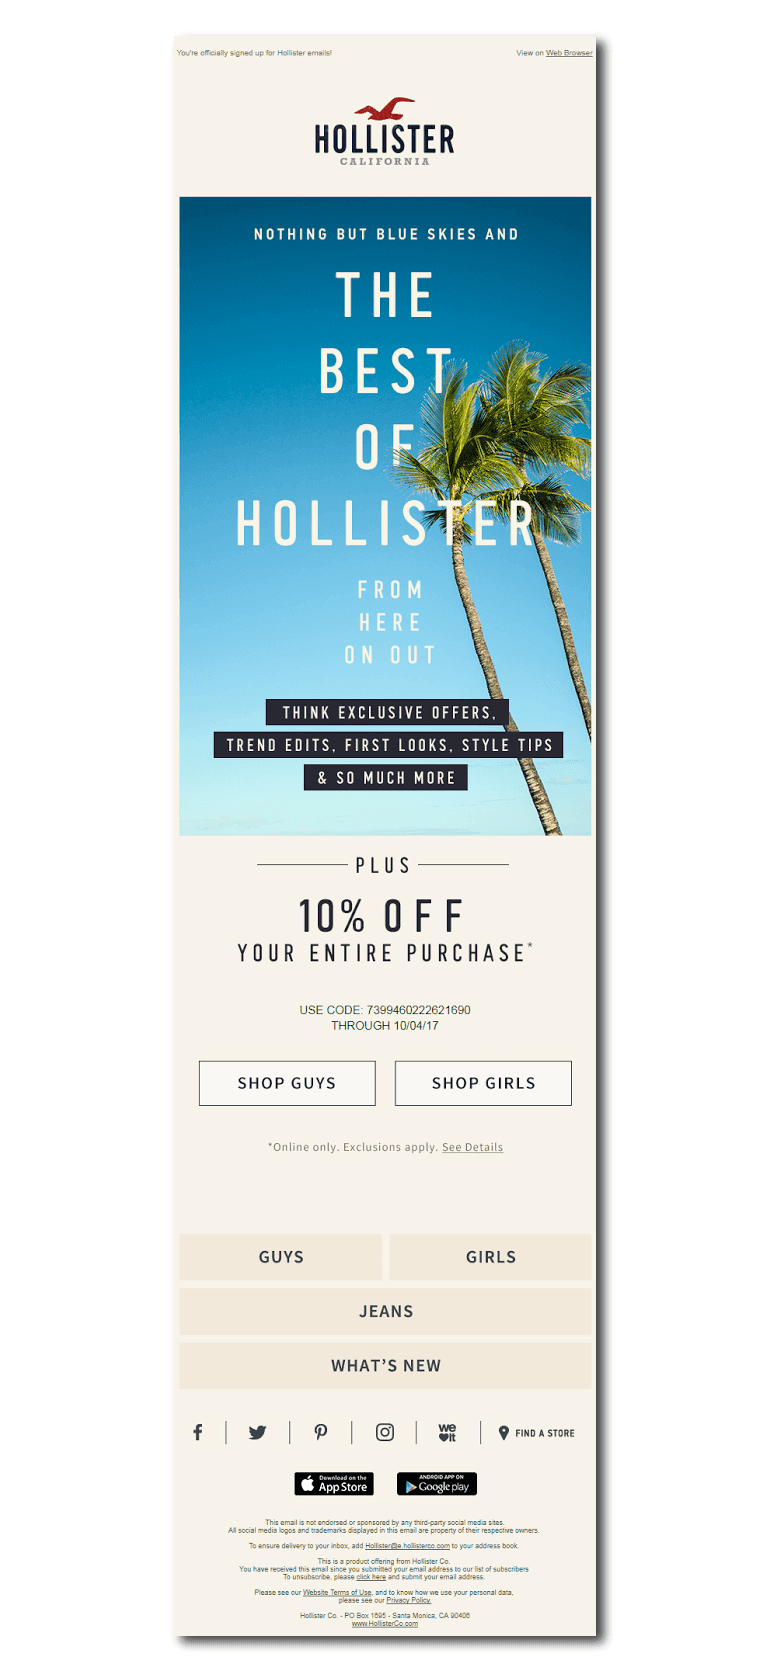 Example of a welcome email from Hollister